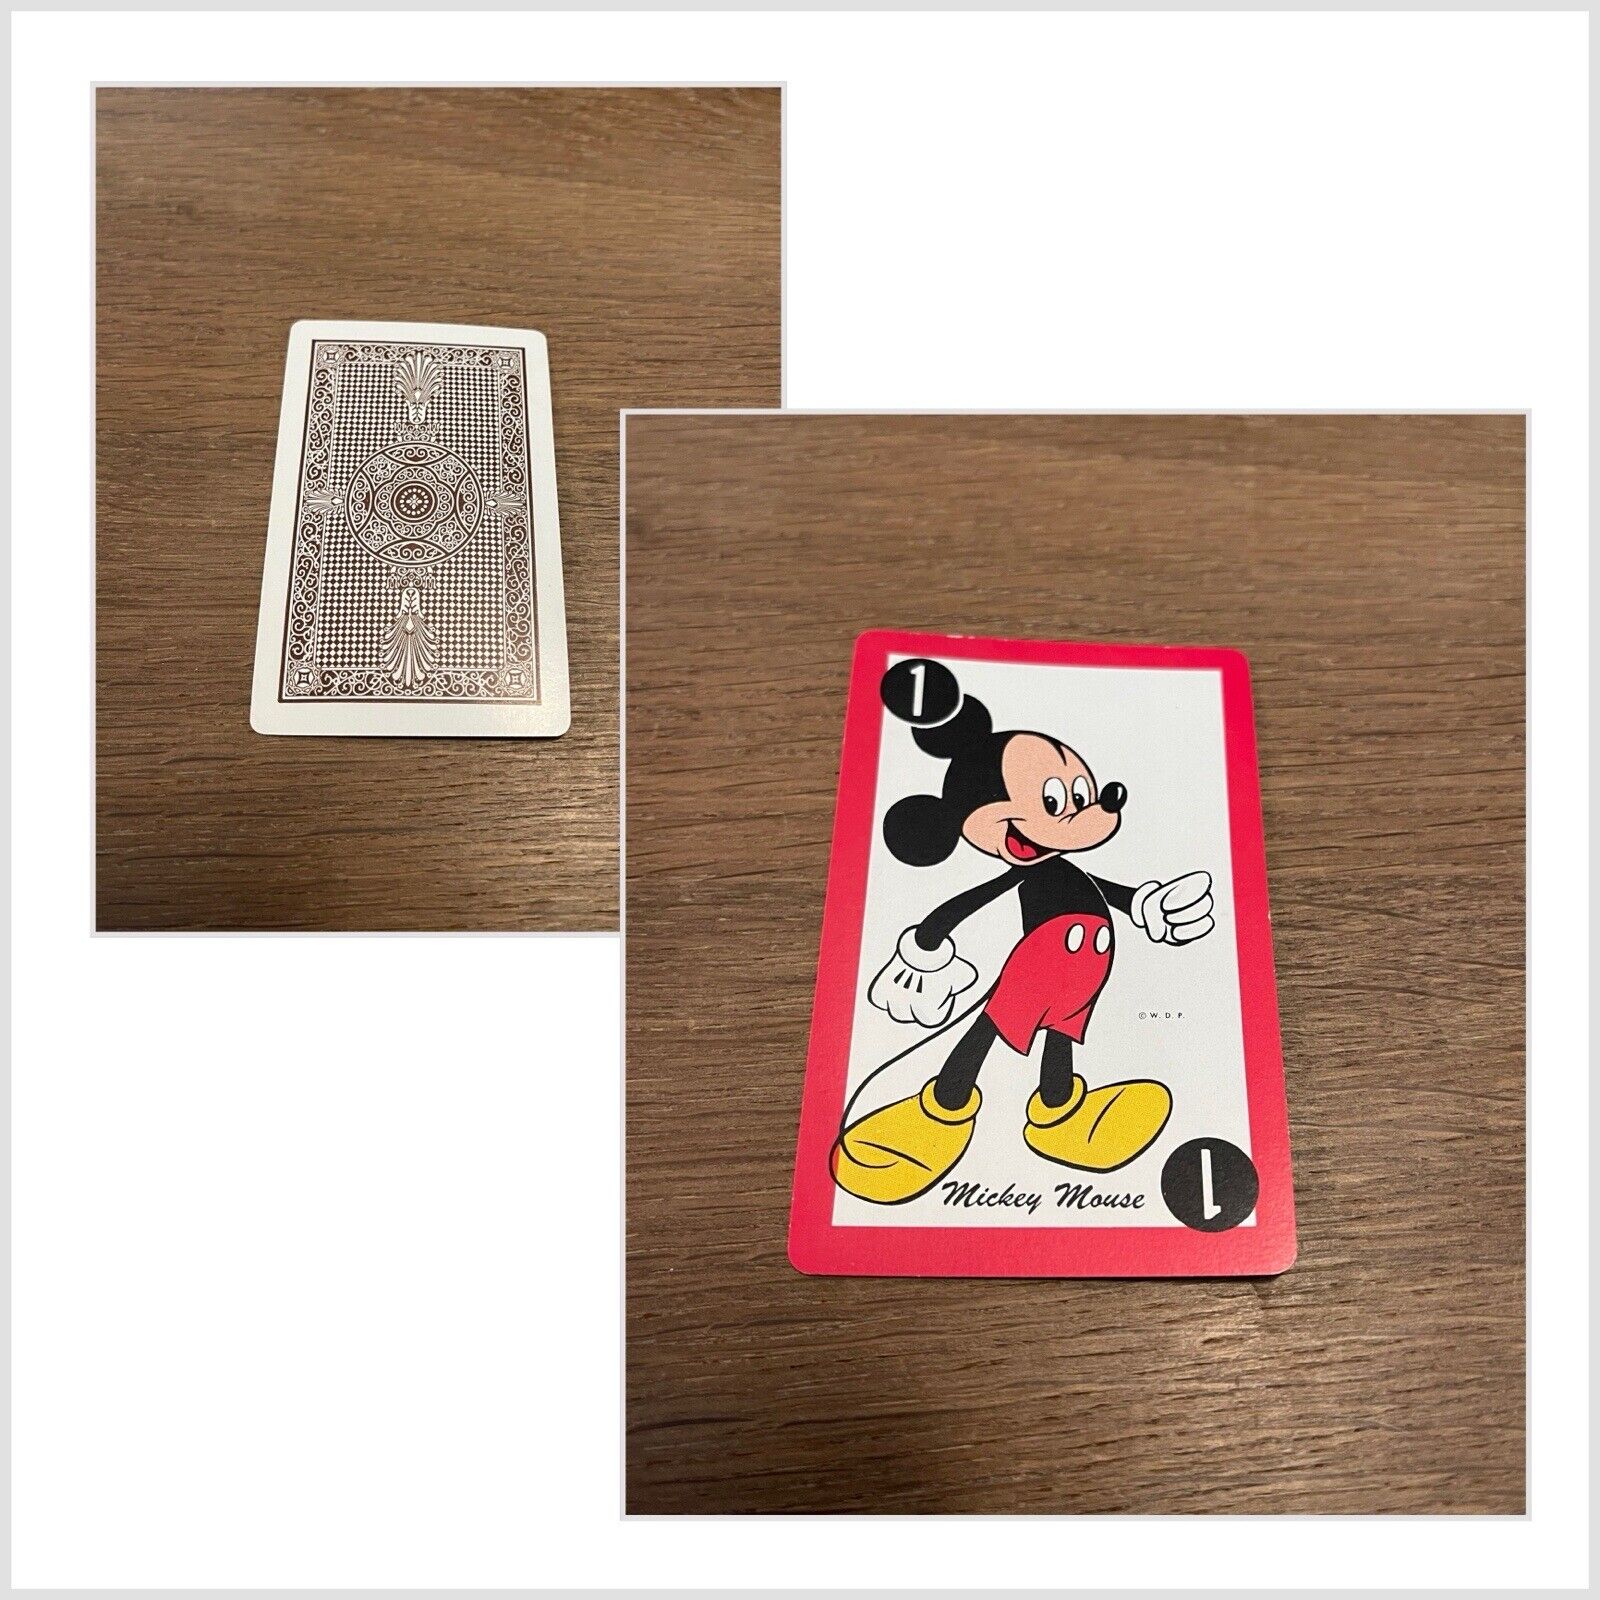 RARE VINTAGE 1949 WHITMAN DISNEY DONALD DUCK PLAYING CARD GAME MICKEY MOUSE CARD